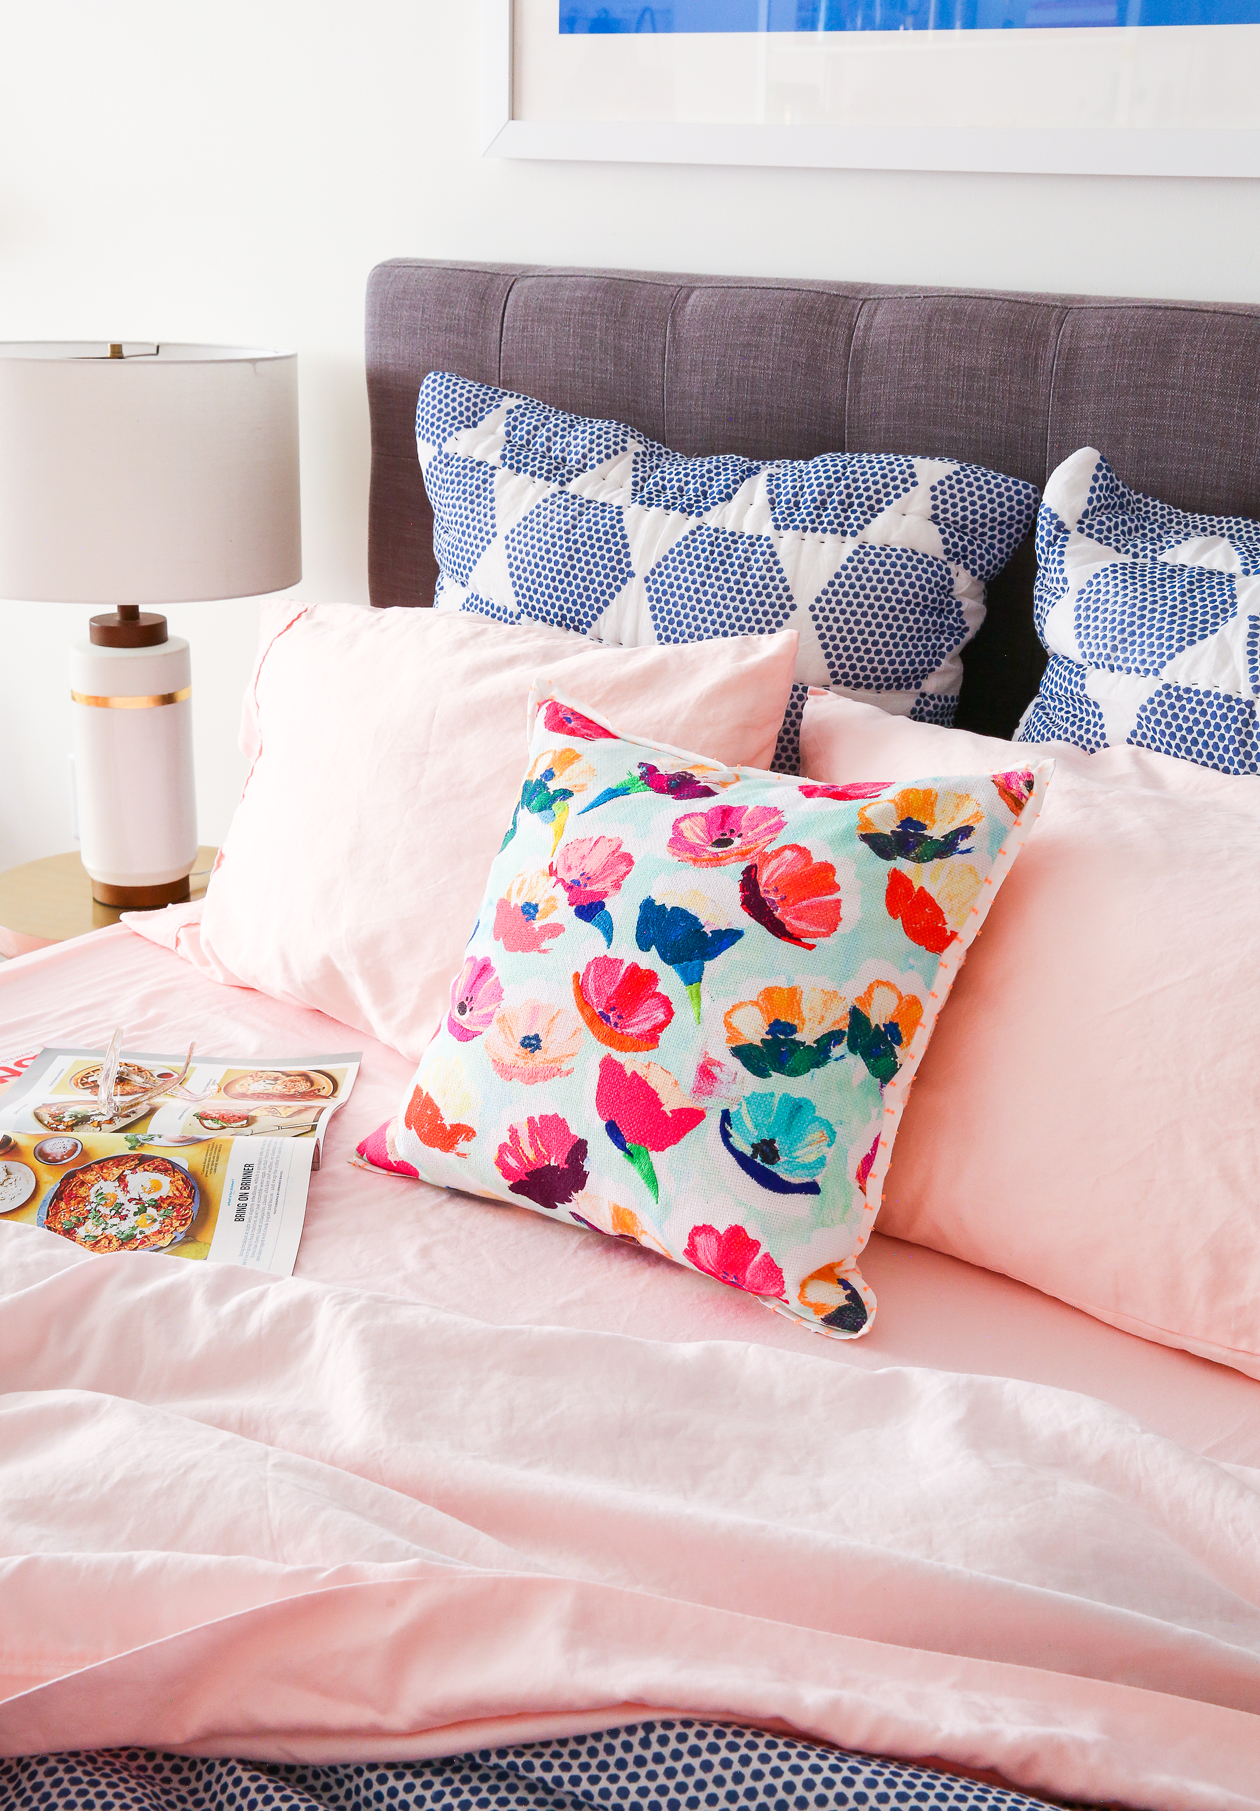 Add some color to your bedroom with these DIY millennial pink sheets! Give your existing bedding a colorful makeover with this easy project. There are two ways to dye your bed sheets and Rachel of The Crafted Life is sharing all of her tips!